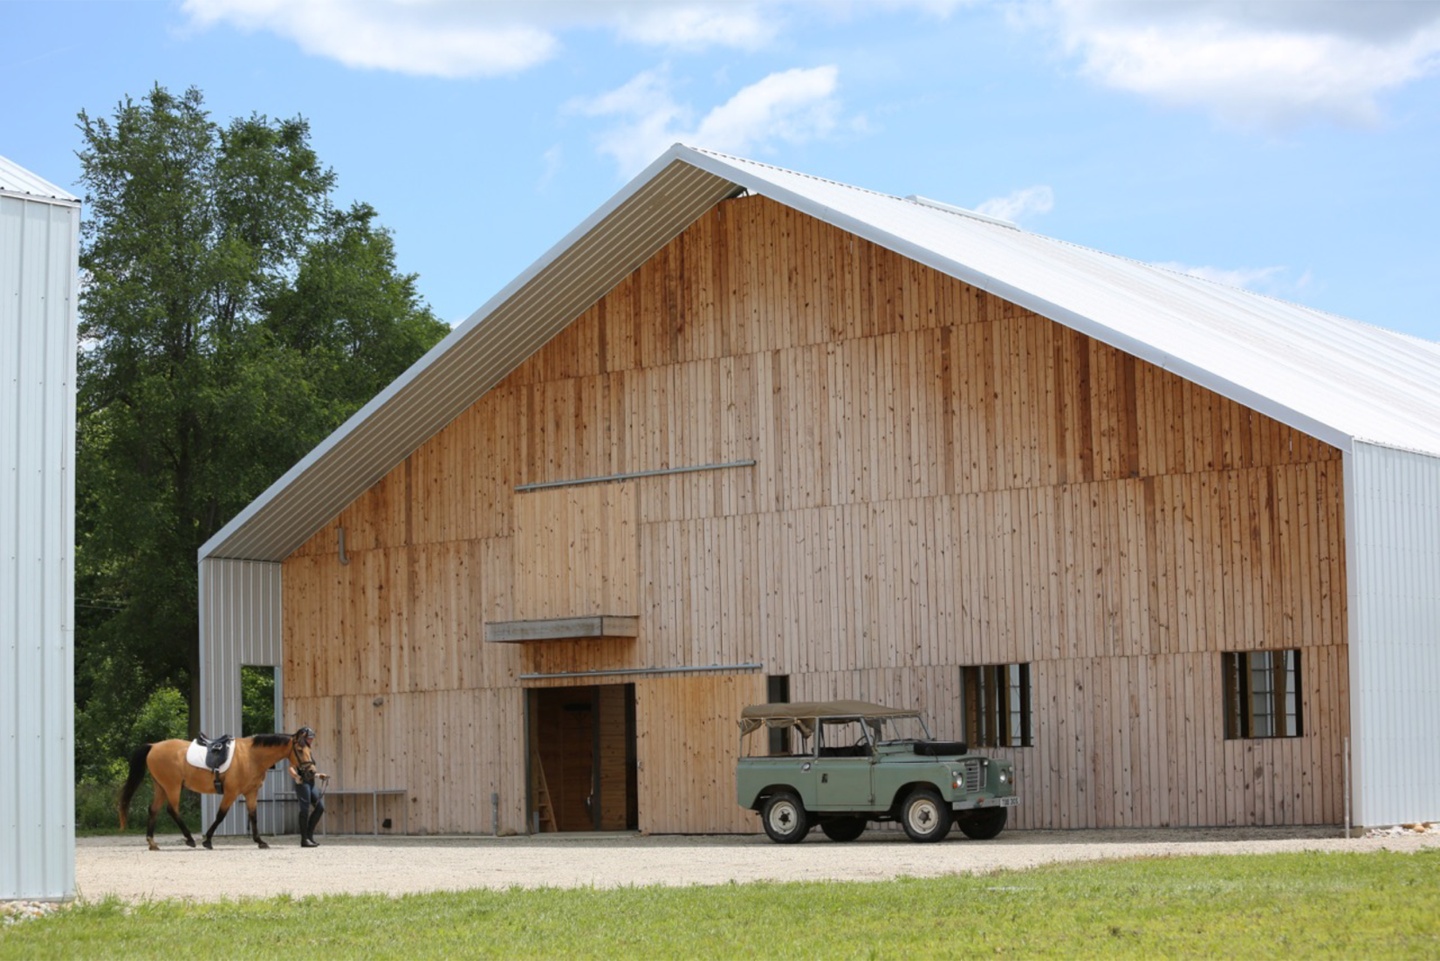 Front of a gabled barn with white roof and siding overhanging the entryway. The front wall is constructed of four rows of vertical wood slats and includes a sliding barn door and two small windows.